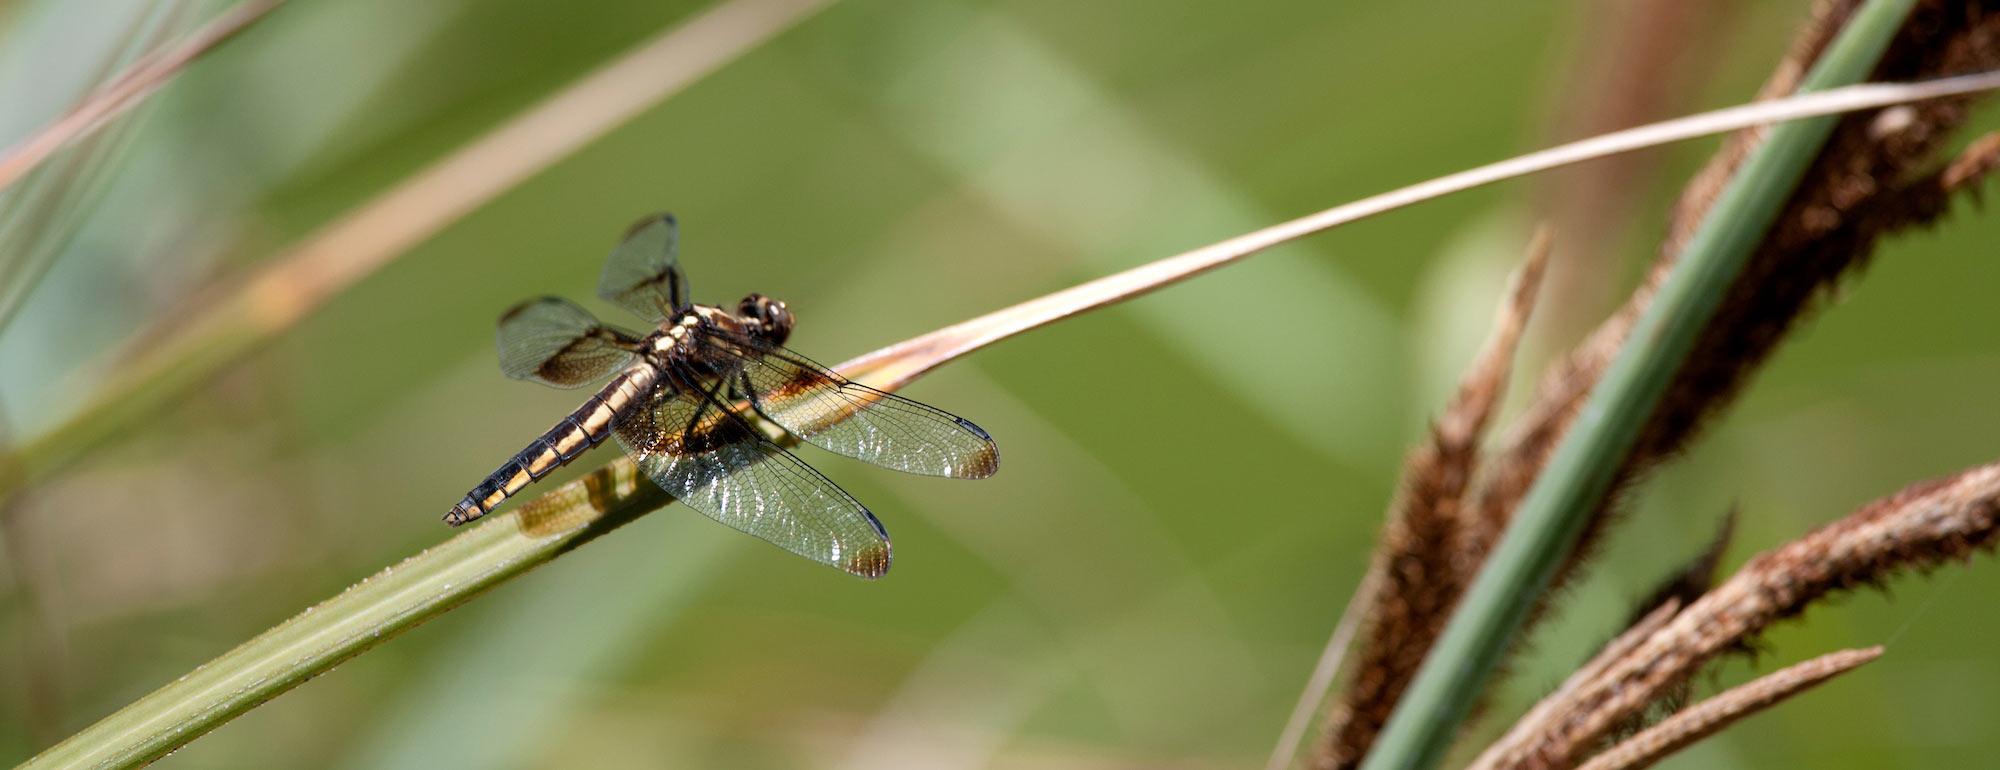 A dragonfly takes a brief rest on a blad of grass